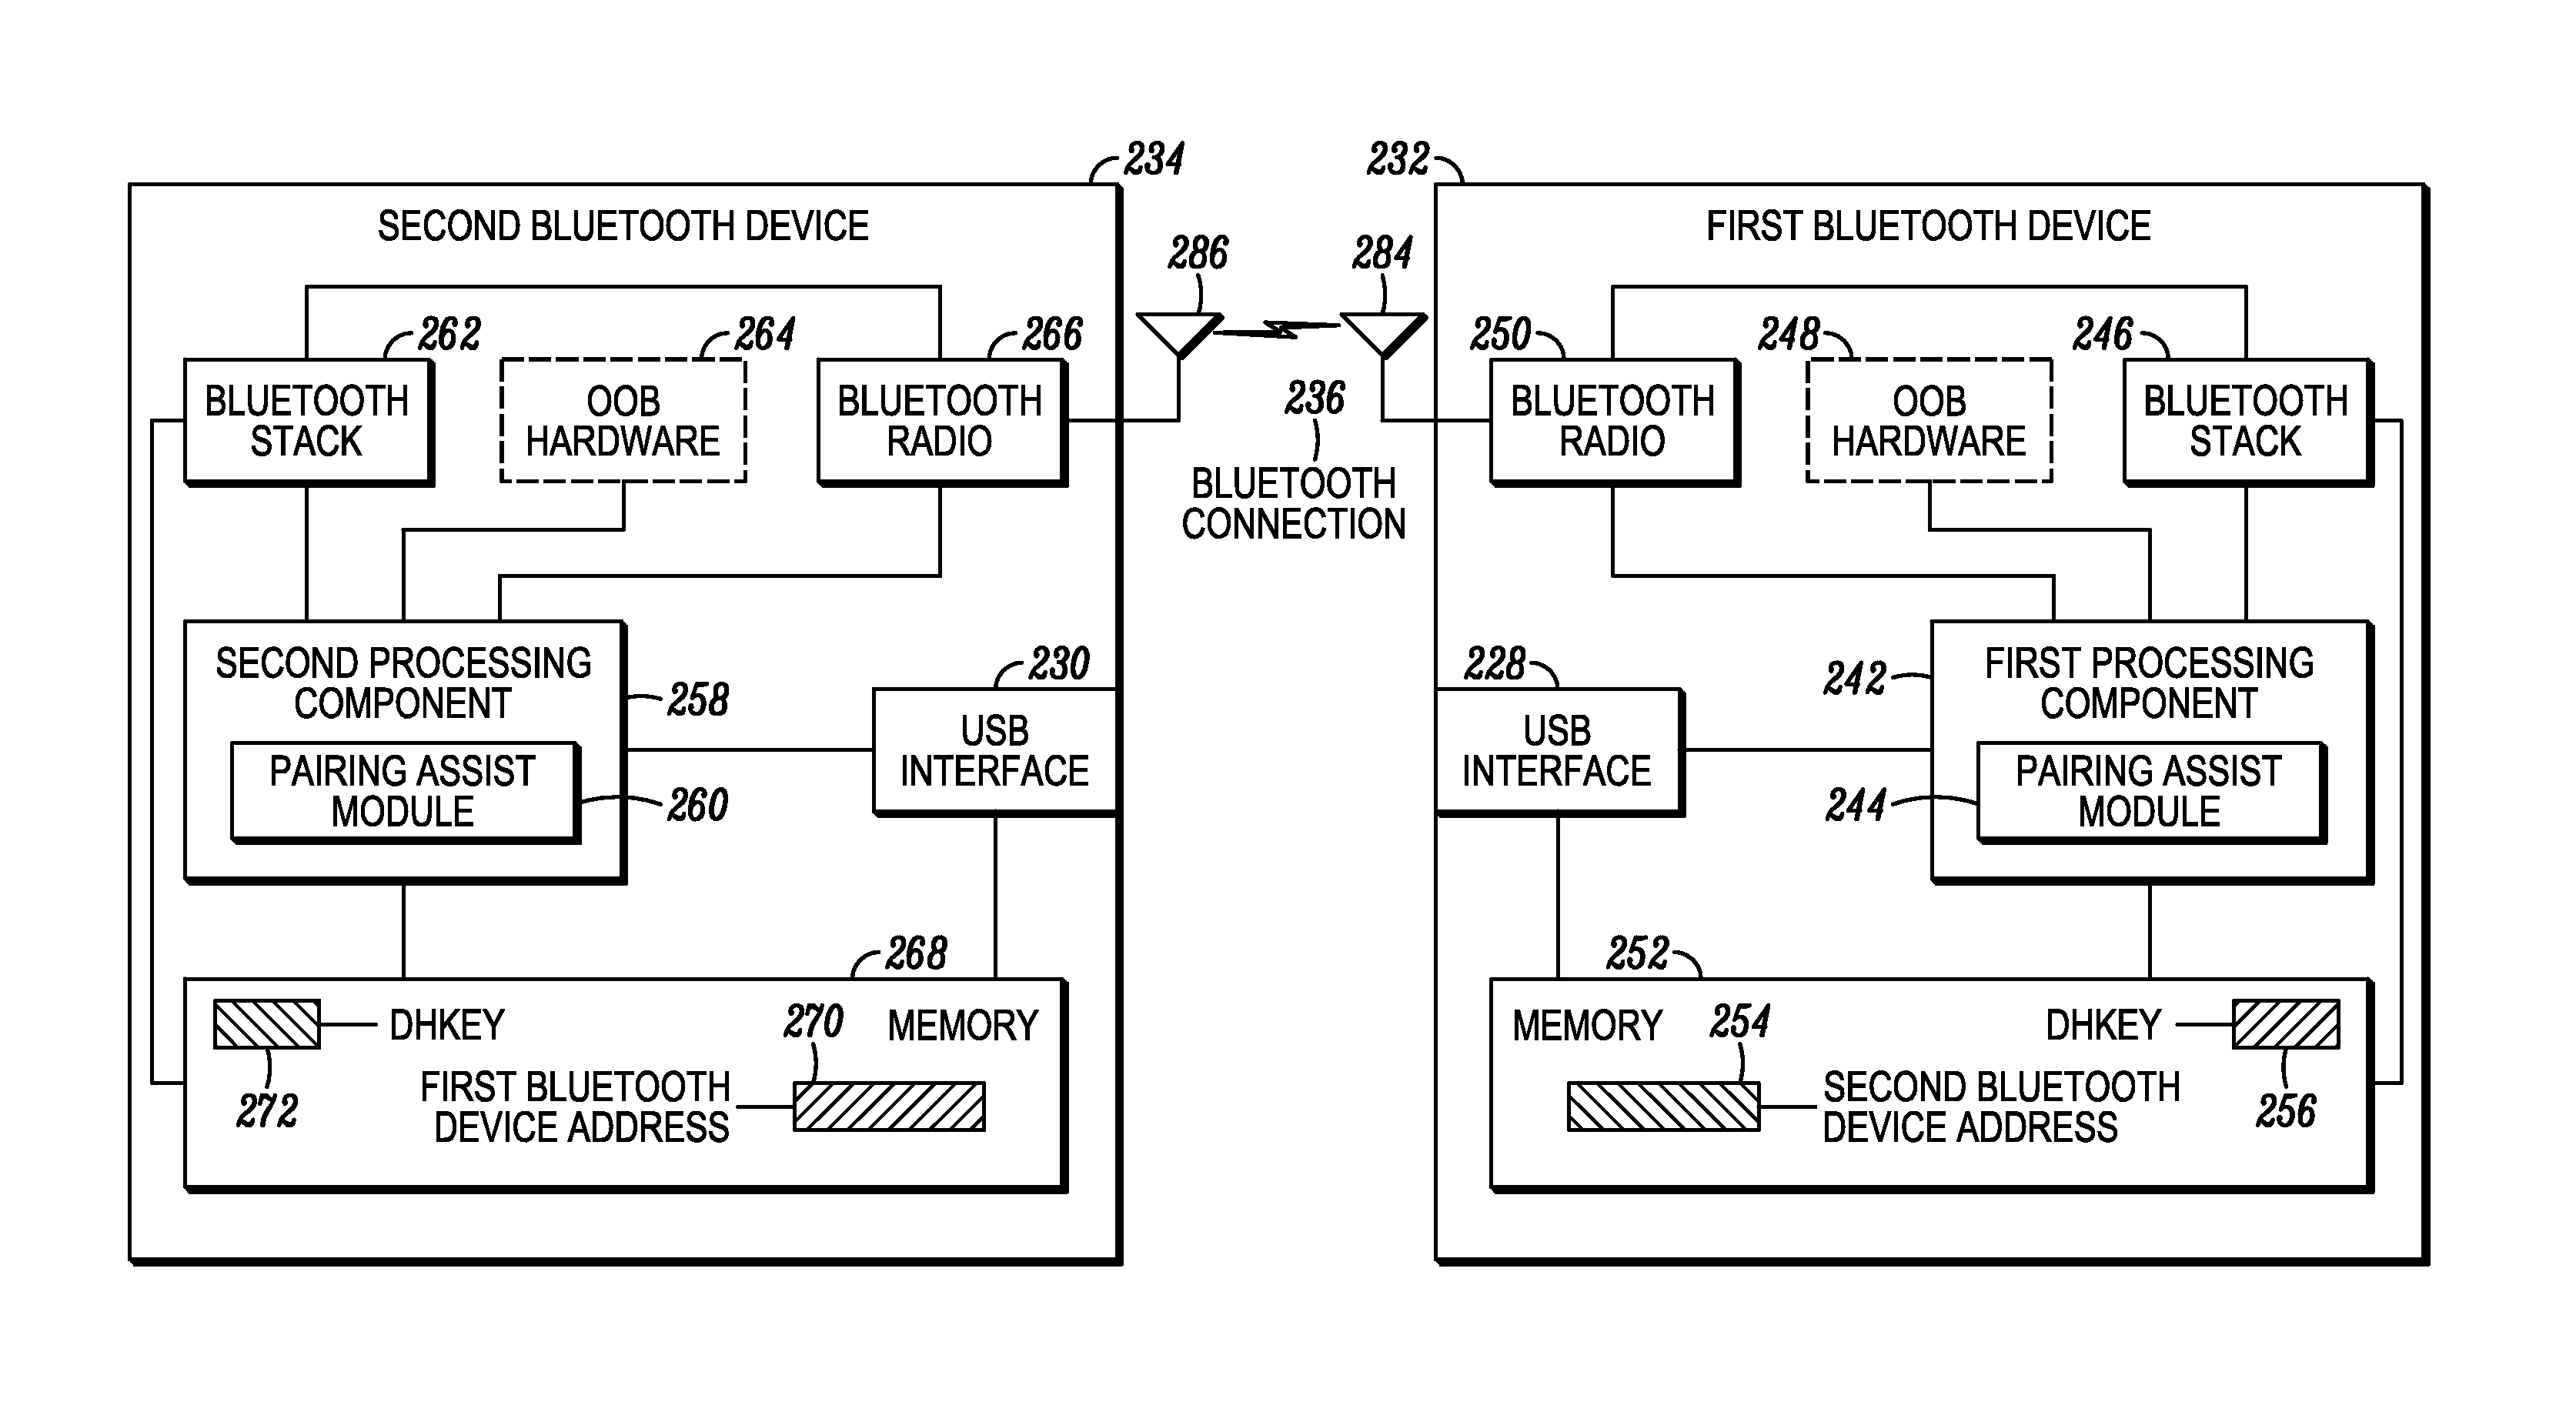 Method and apparatus to facilitate pairing between wireless devices